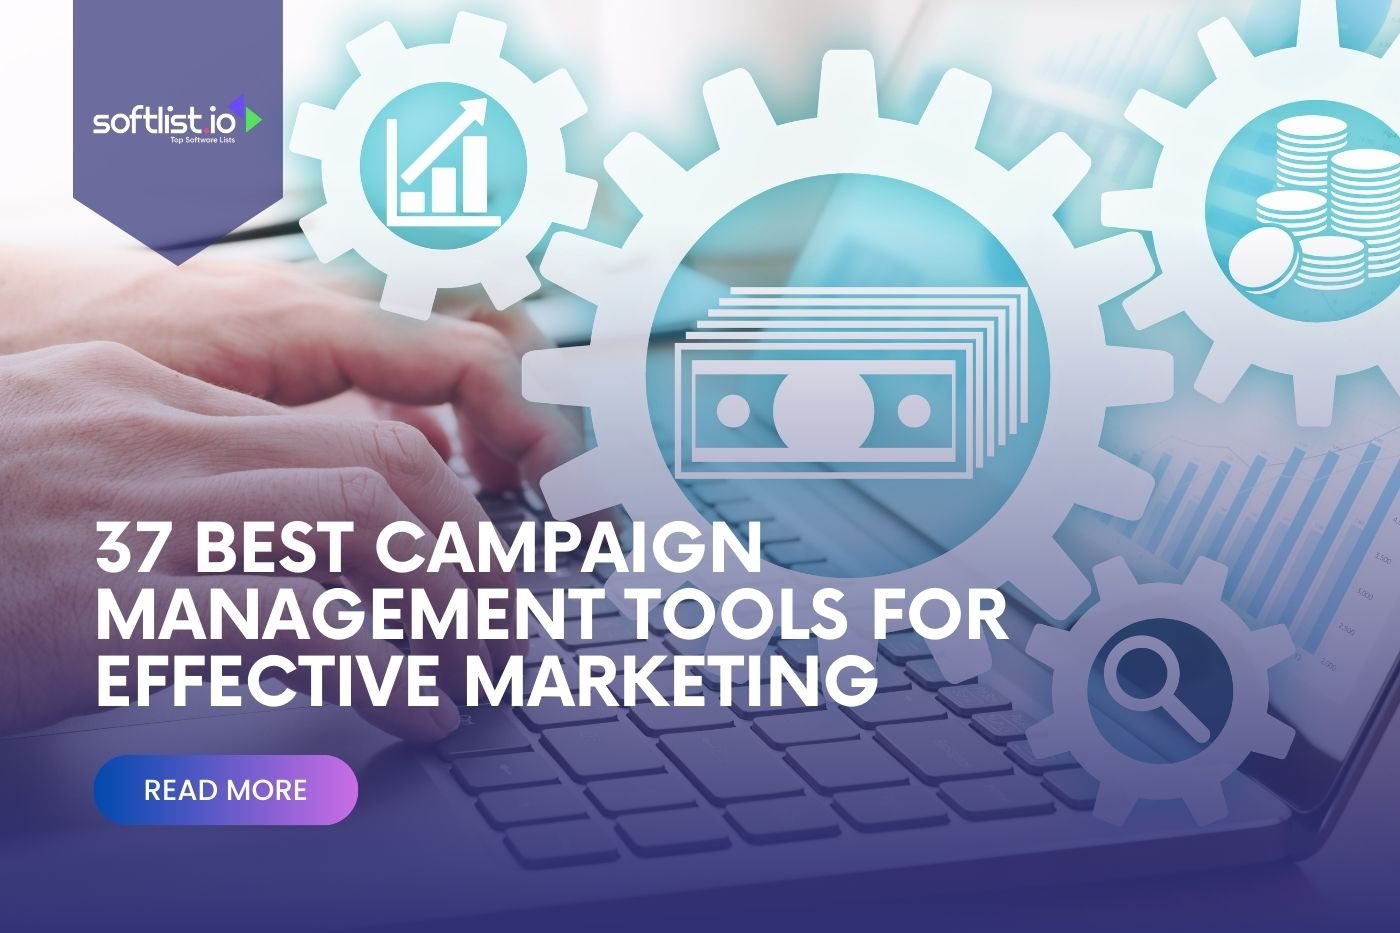 37 Best Campaign Management Tools for Effective Marketing